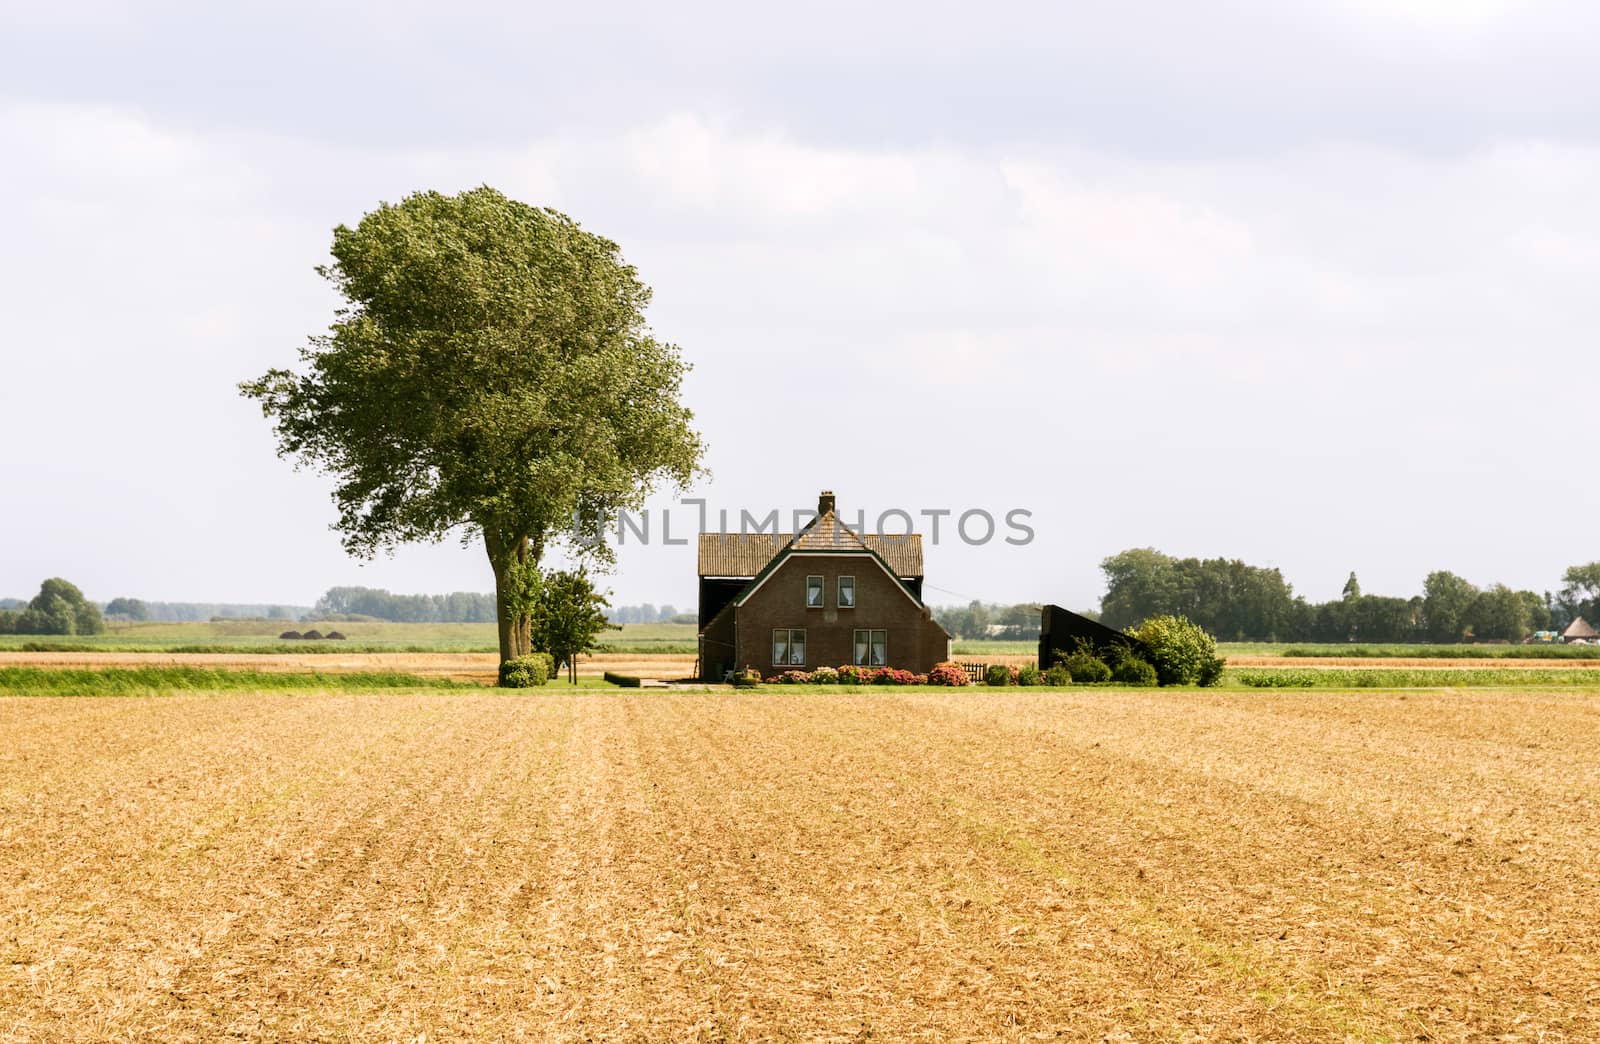 farm with single tree in the wheat wide field in holland